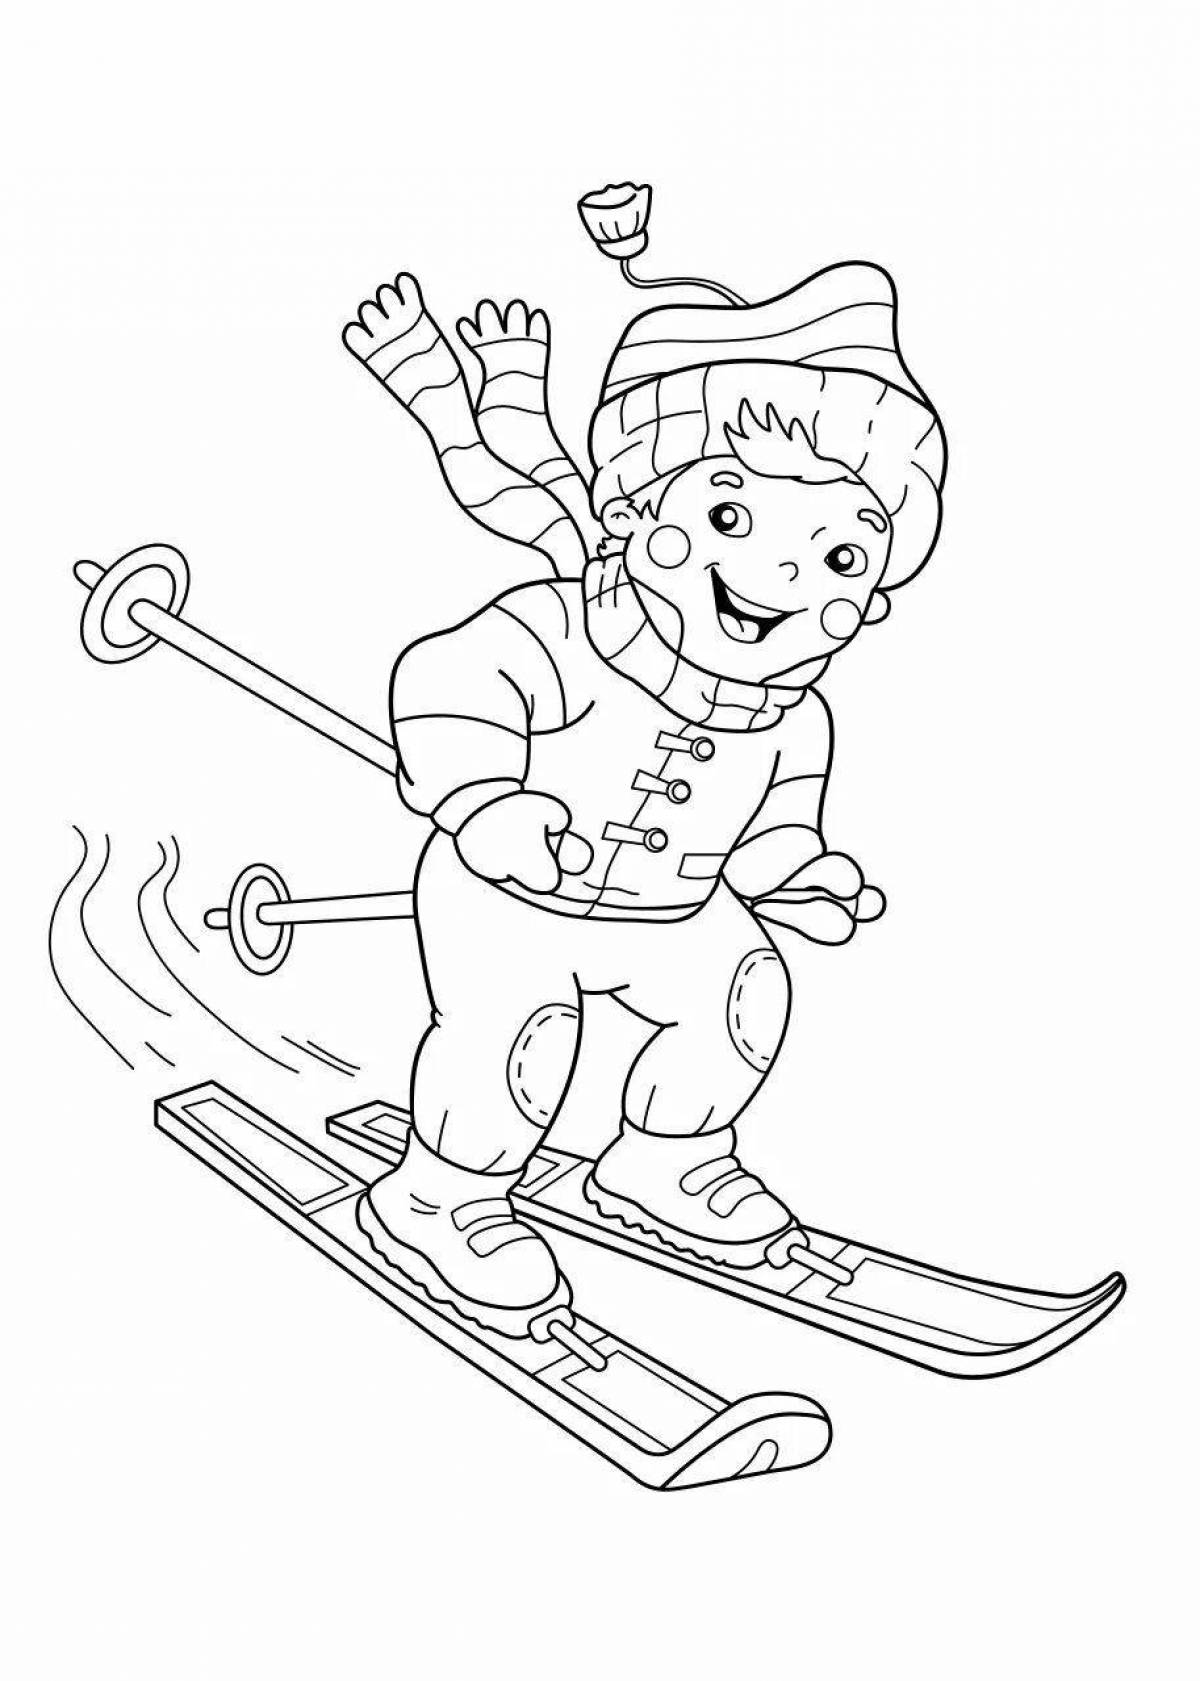 Amazing coloring book for winter sports on a dhow